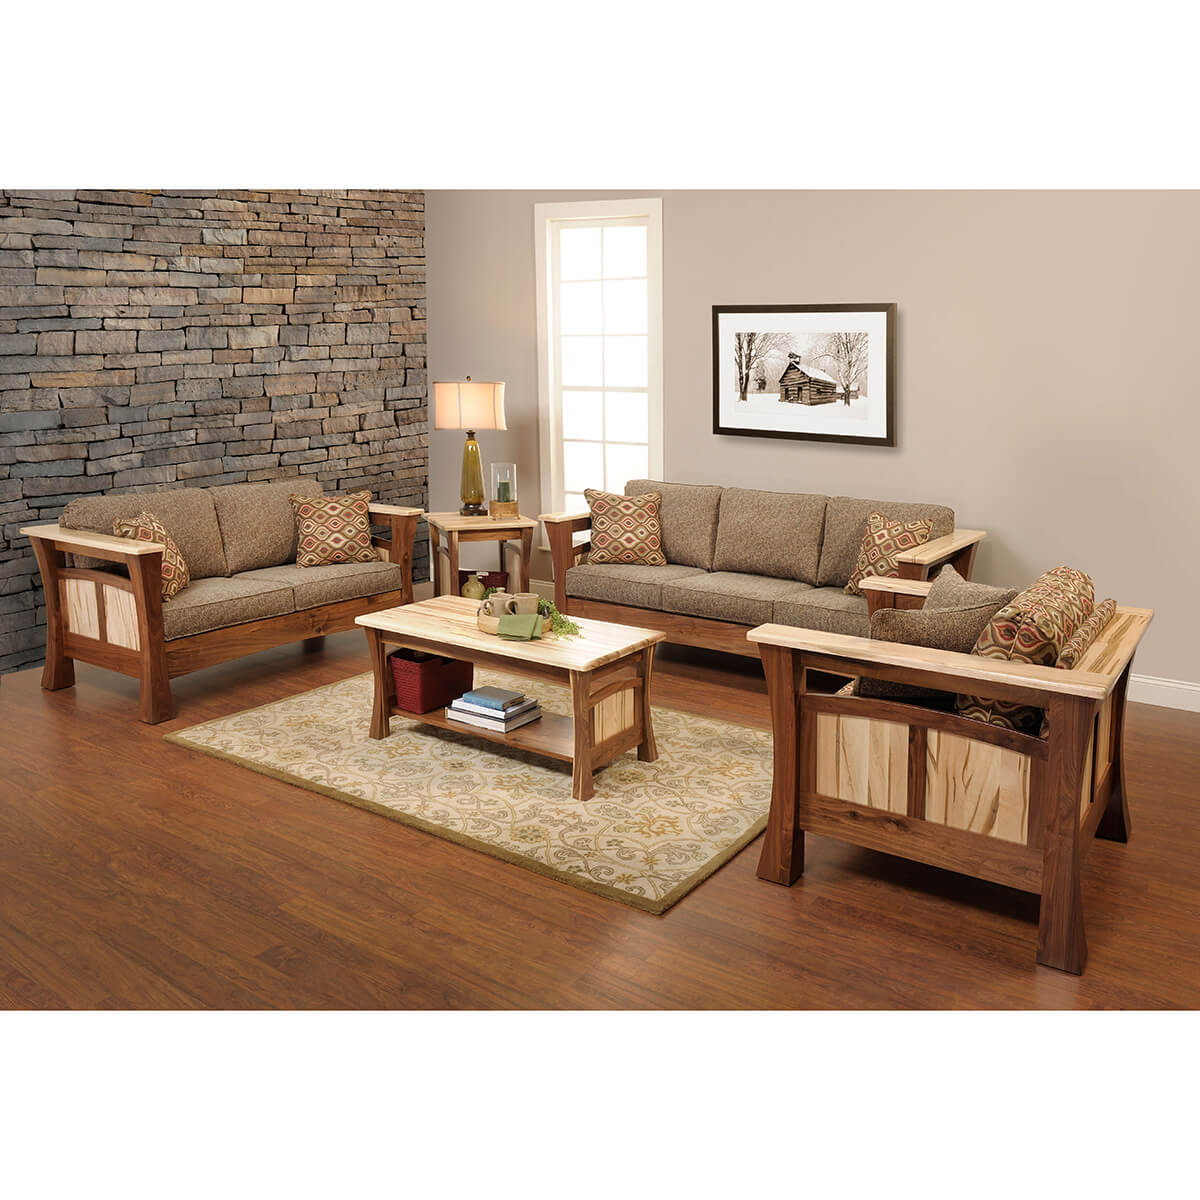 Read more about the article Shaker Gateway Living Room Collection